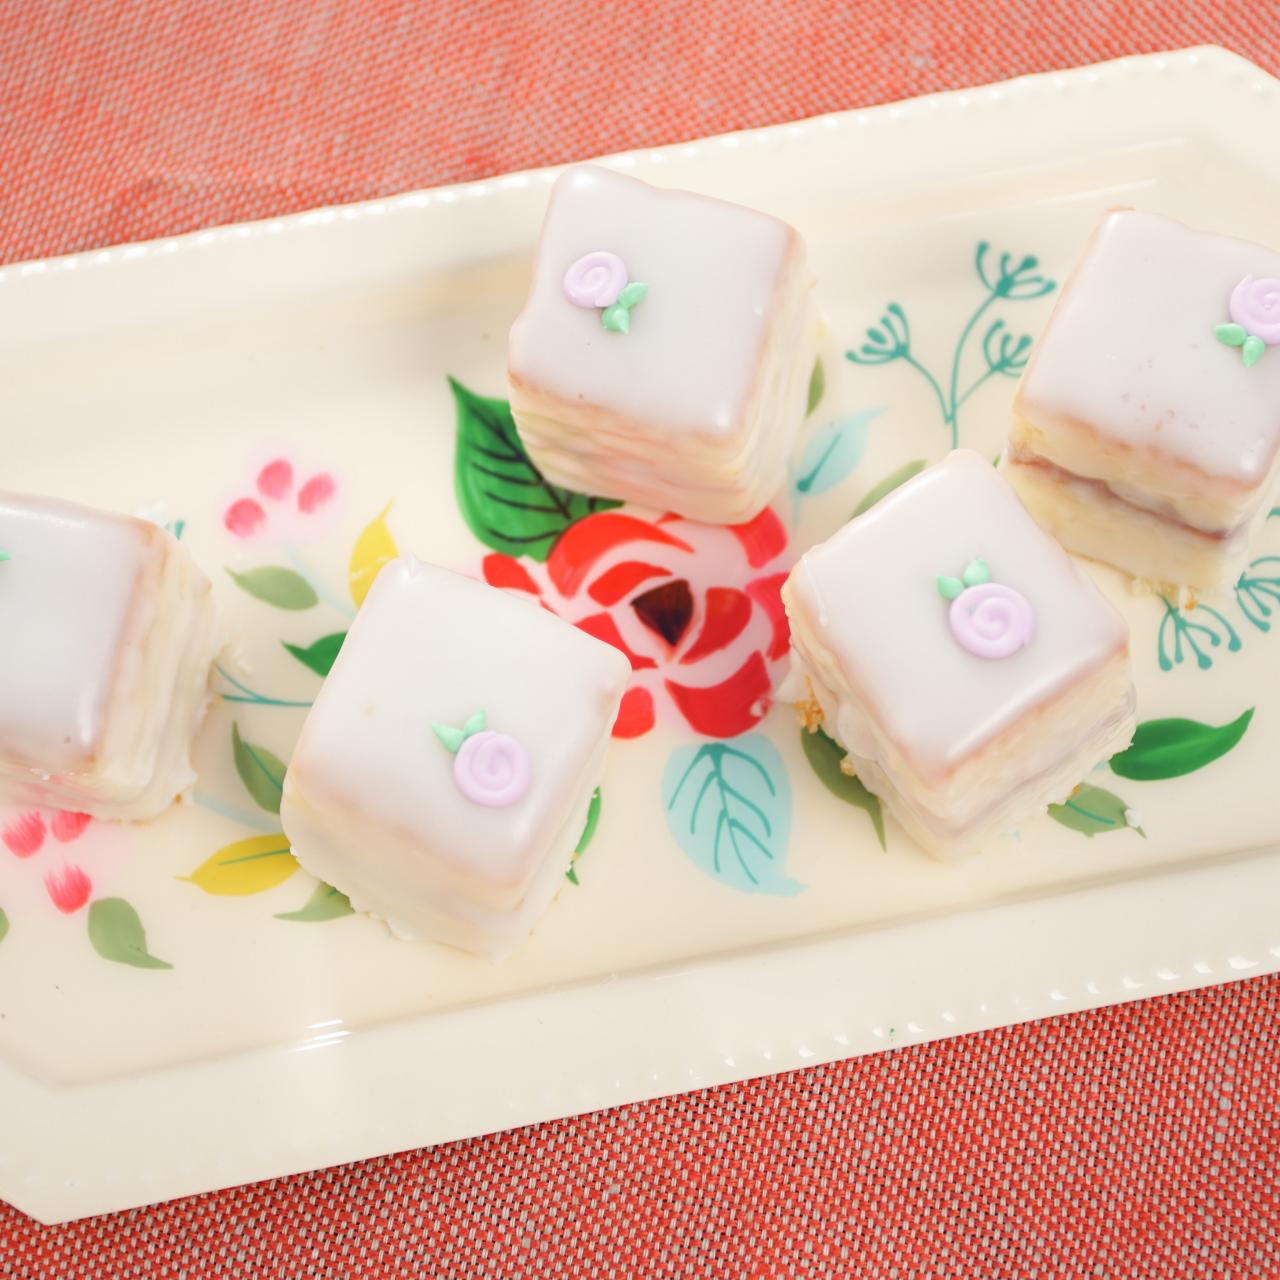 Petit Fours (Baking, Frosting, and Decorating Petit Fours)